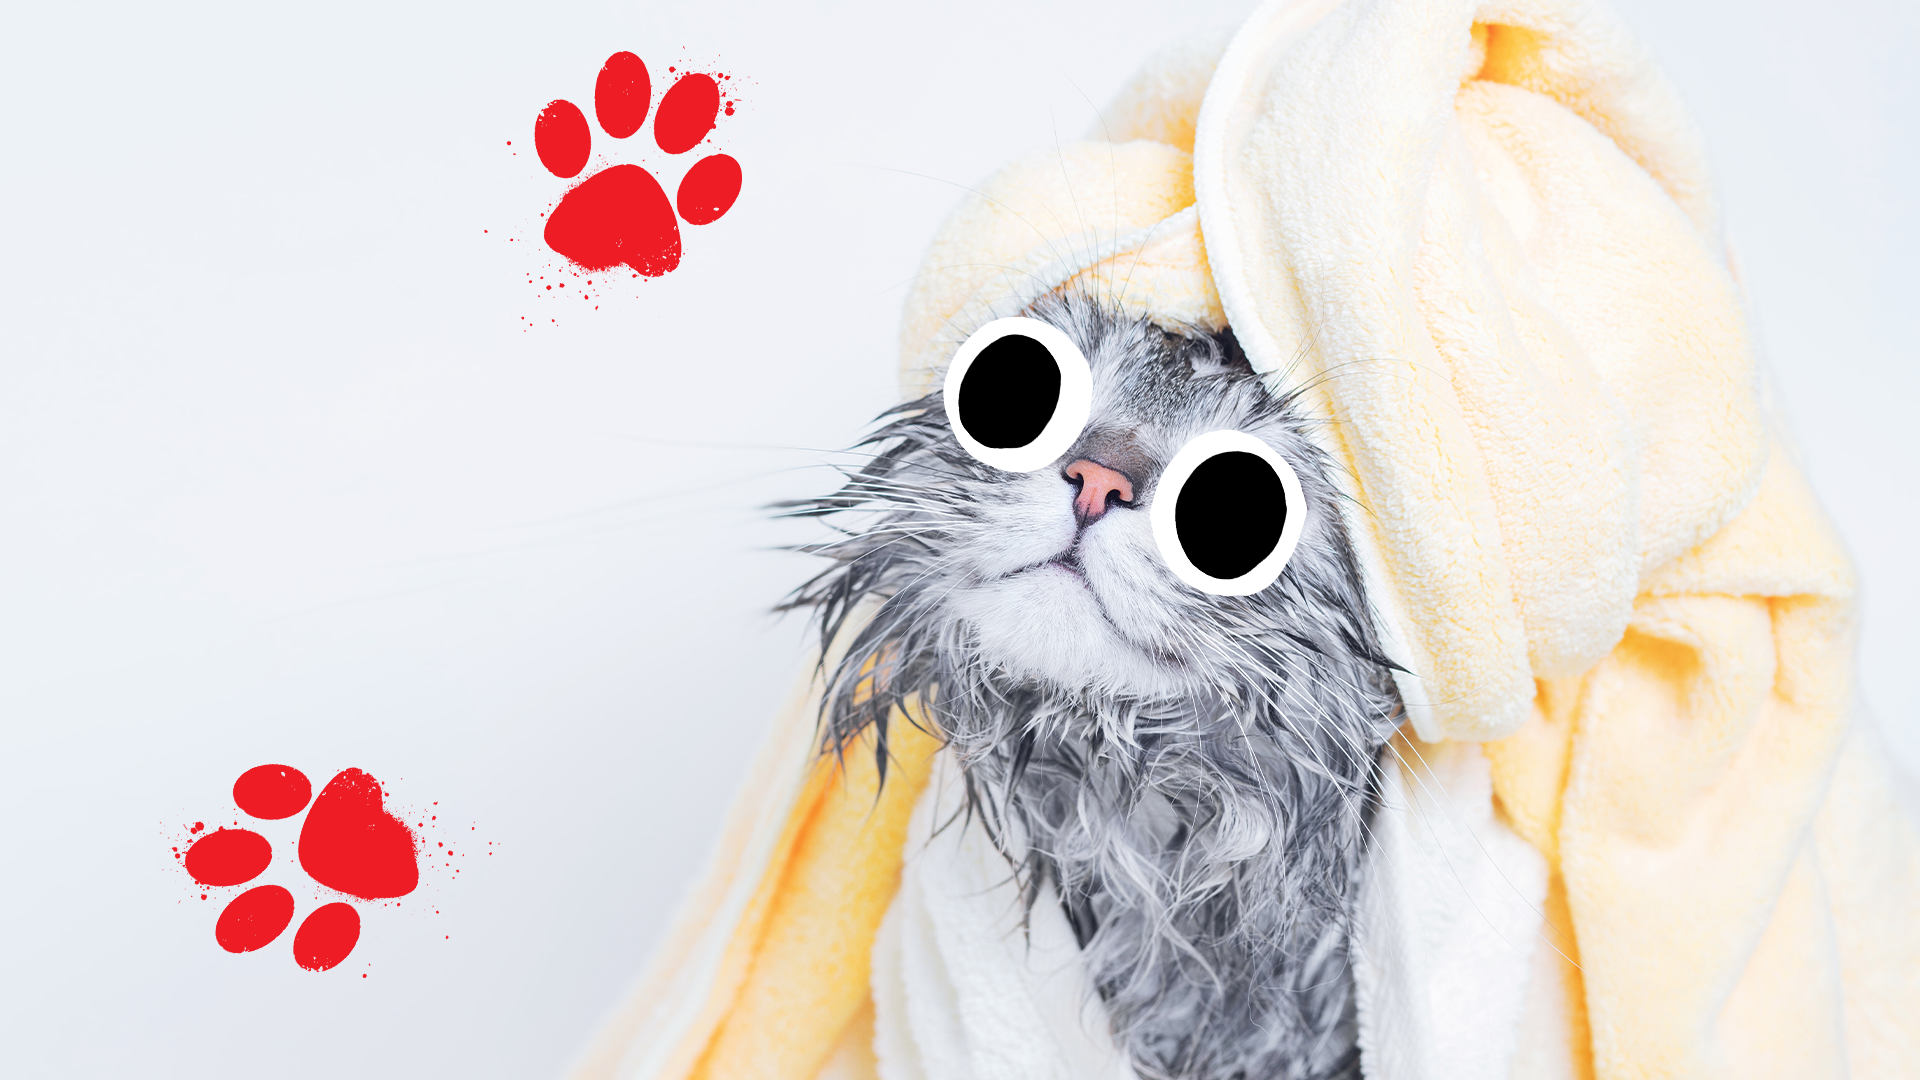 A cat wrapped in towels after a luxurious bath